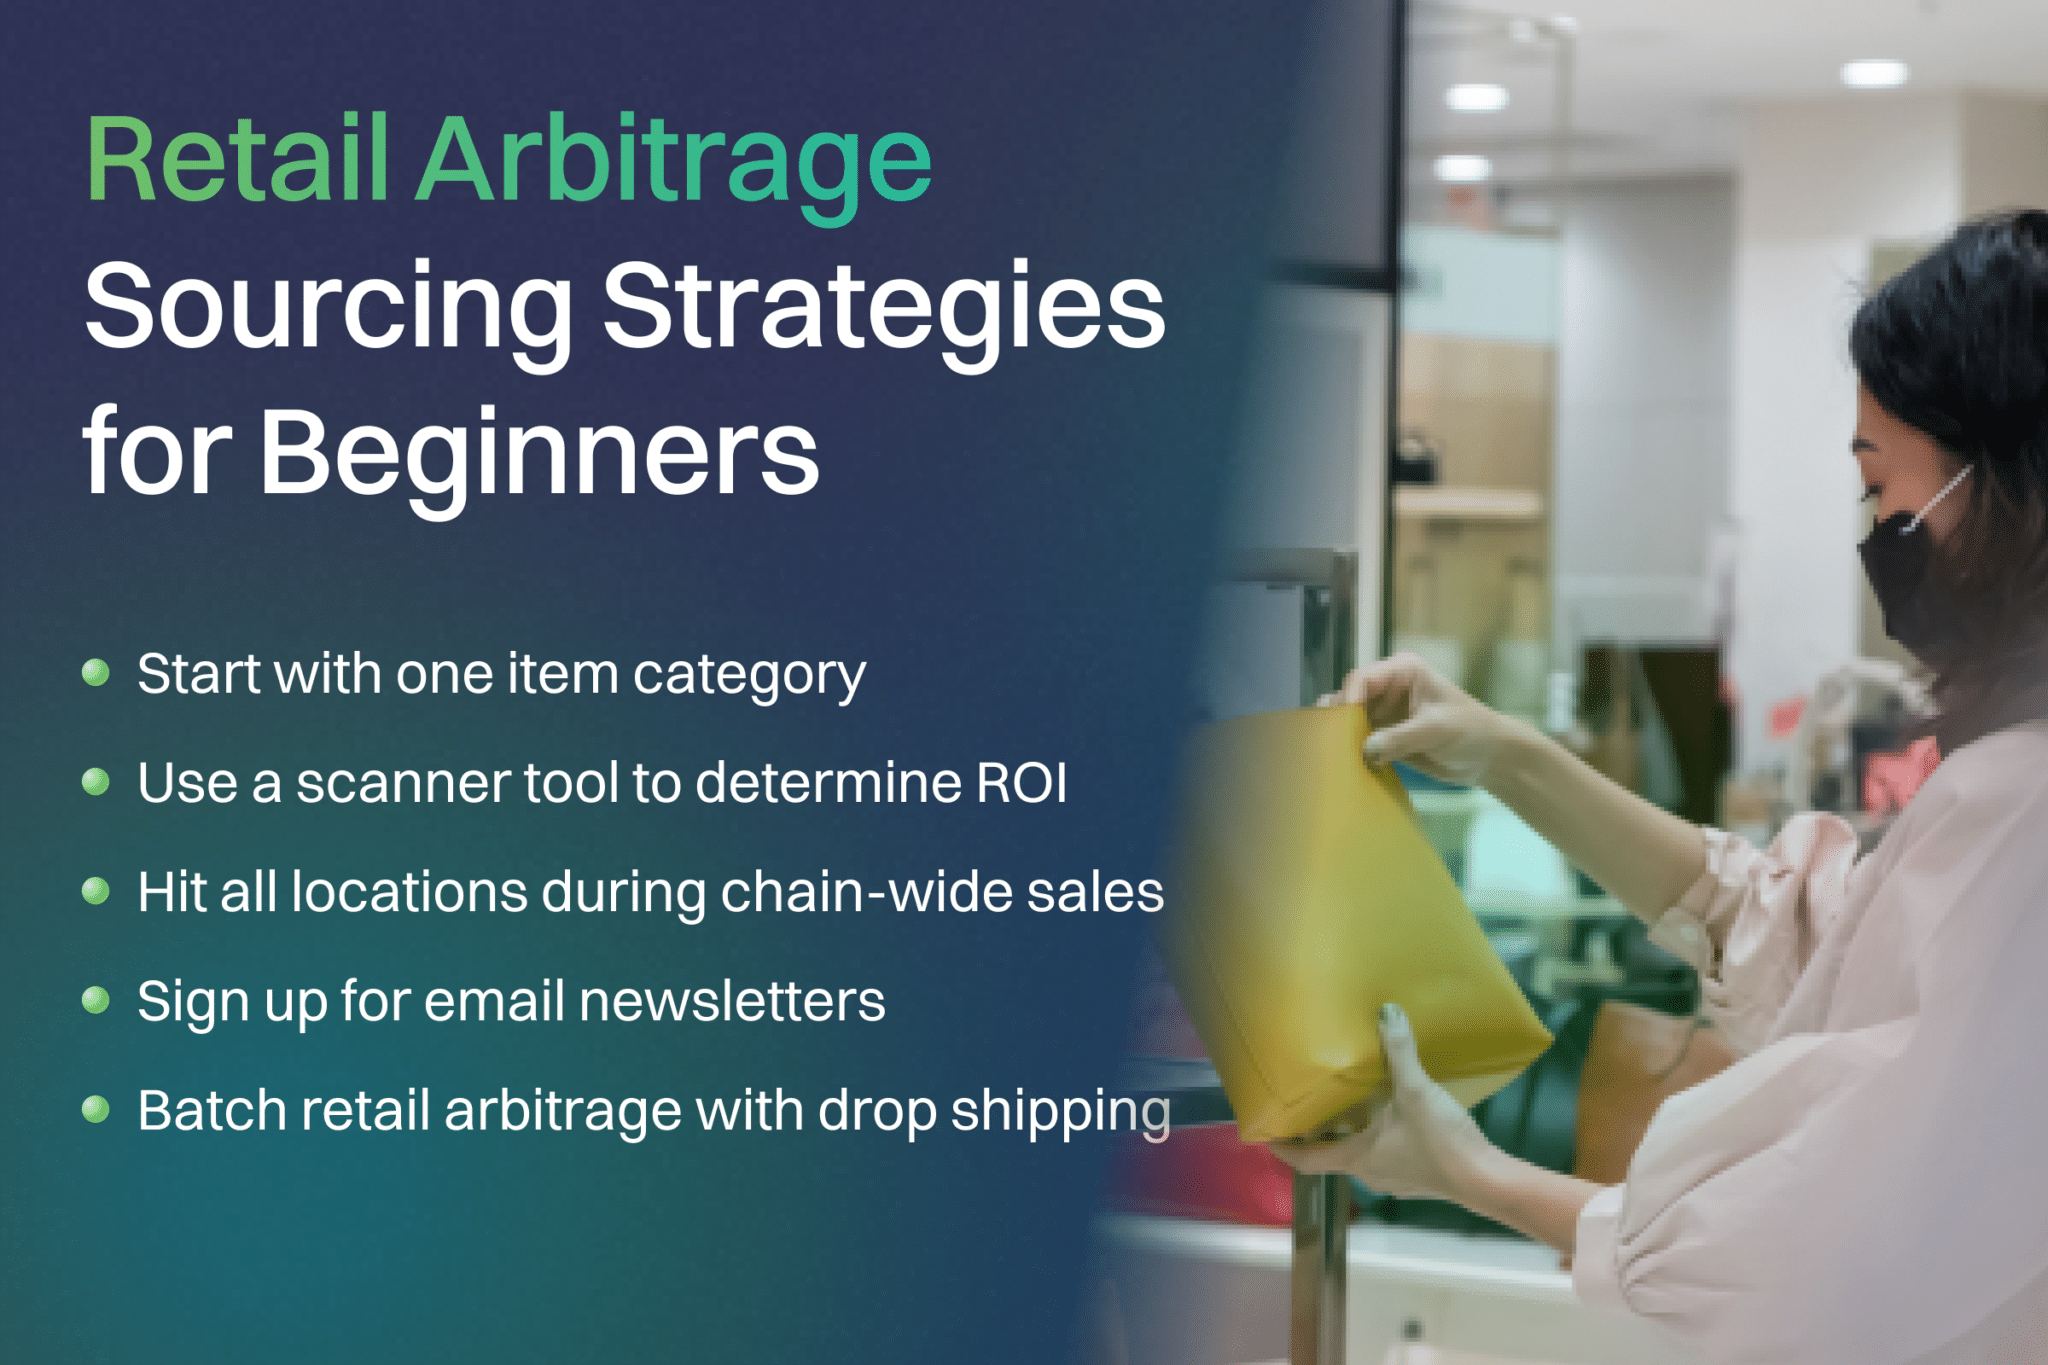 Retail arbitrage sourcing strategy for beginners